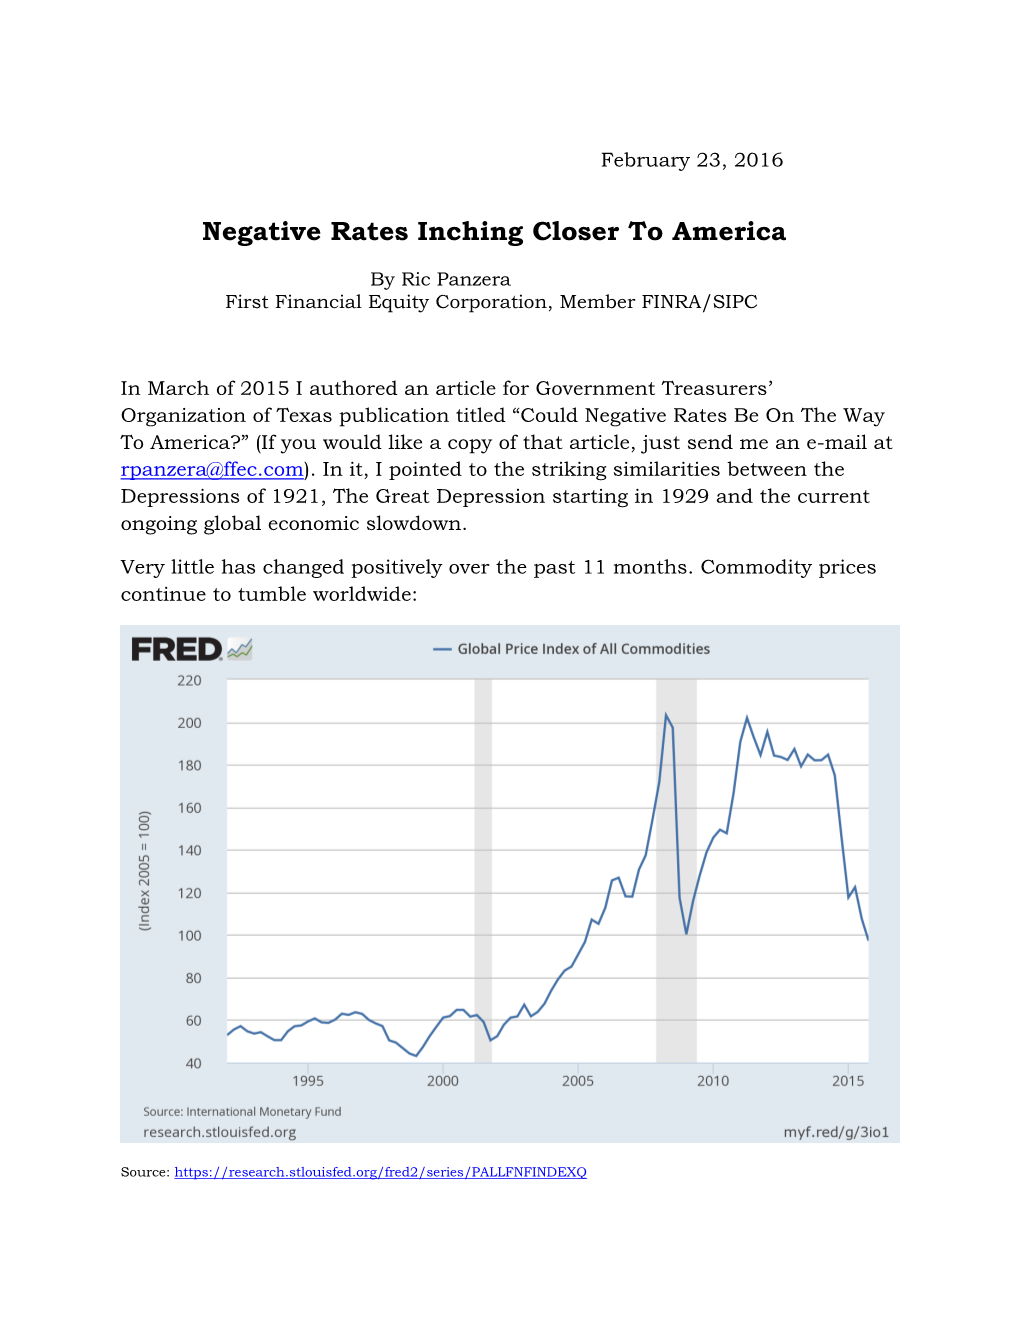 Negative Rates Inching Closer to America